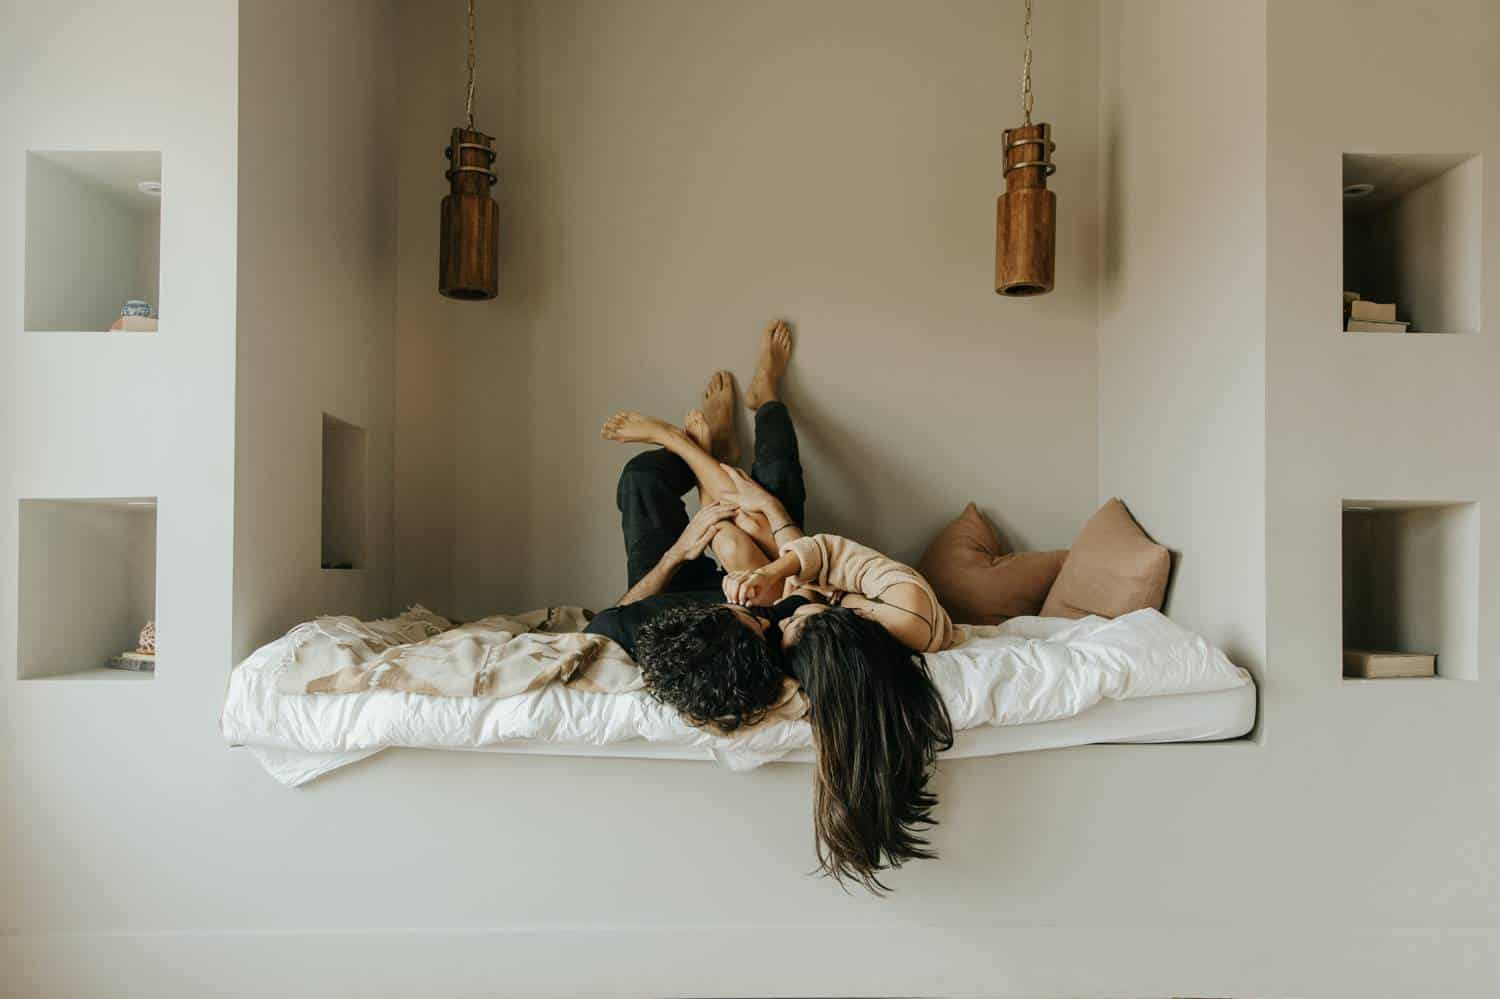 A couple lounges together in an alcove bed, their arms and legs wrapped around eachother in a moment of passion. Learn how to take boudoir photos like this one by reading the ShootProof blog!